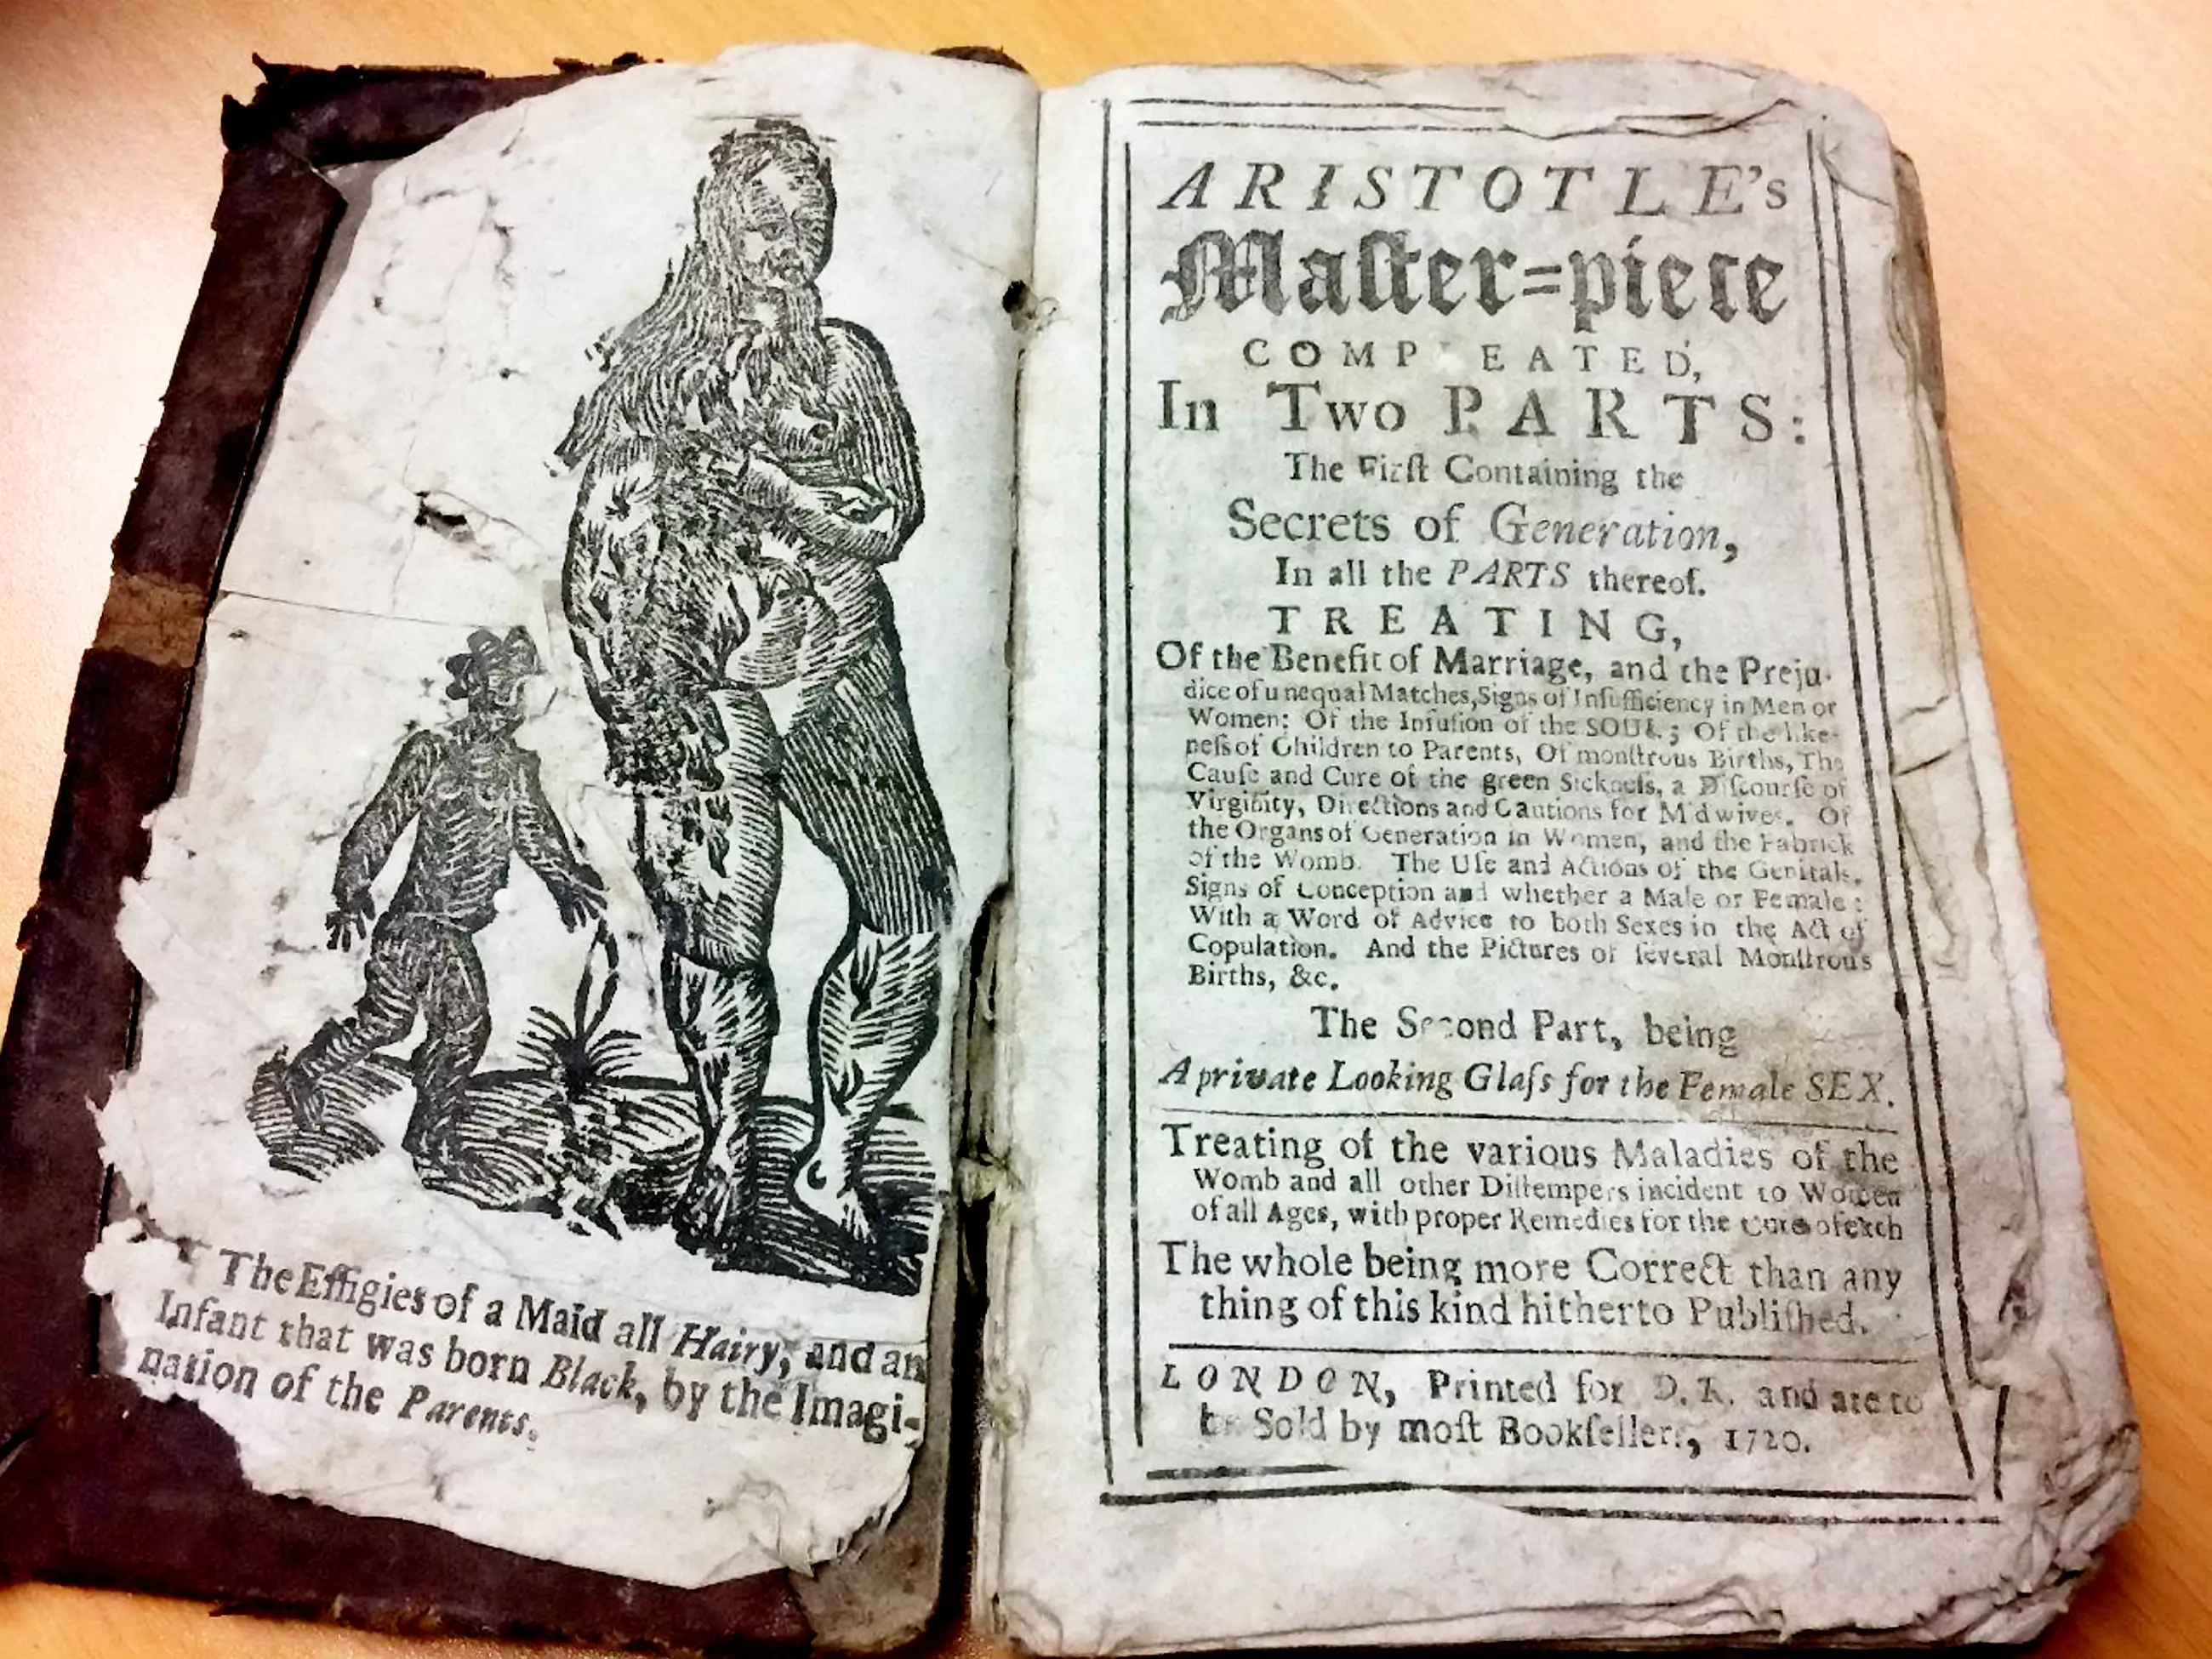 The book could fetch hundreds of pounds at auction.